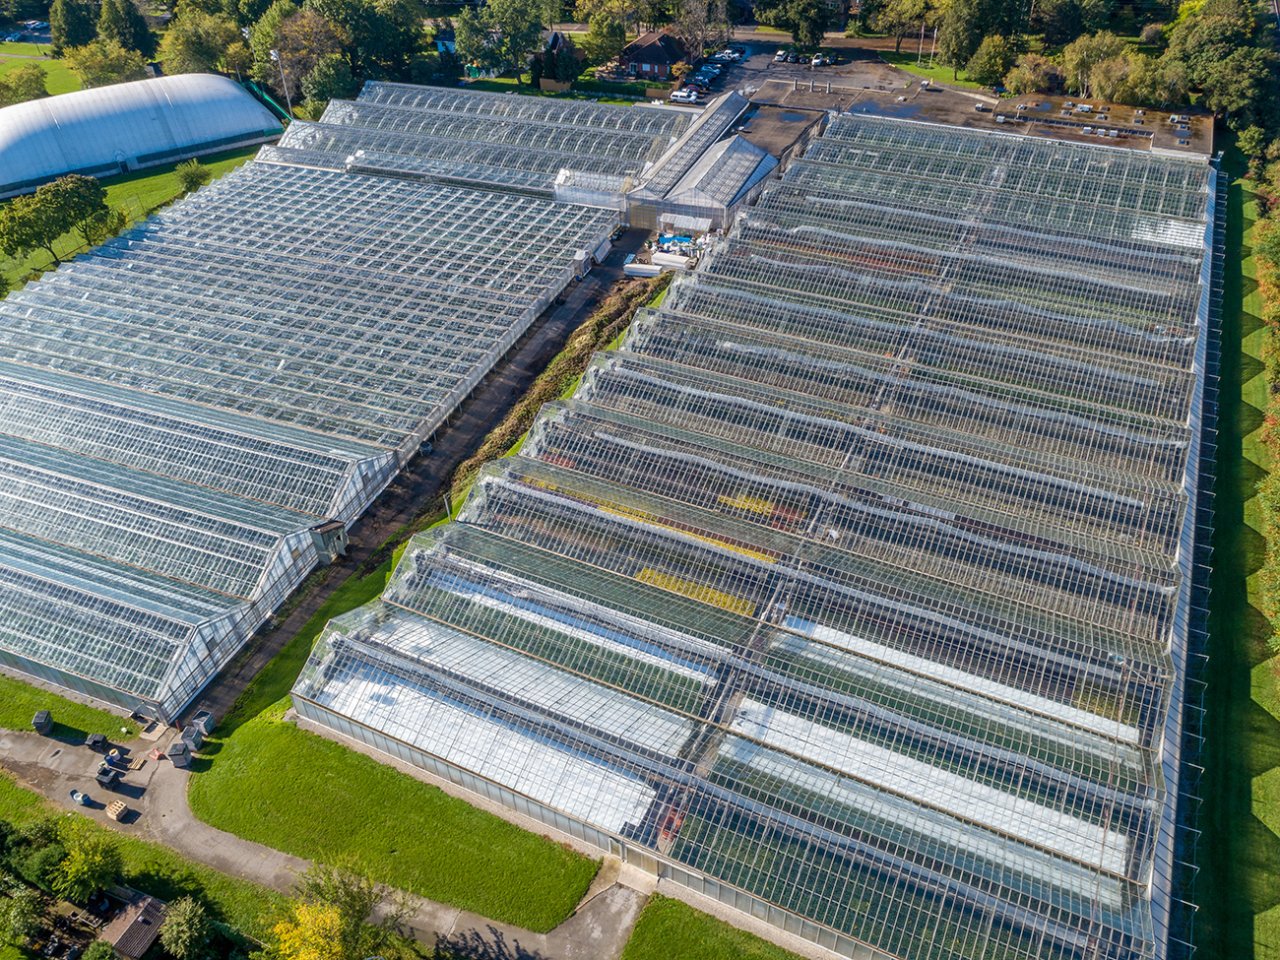 Aerial view of the greenhouses.